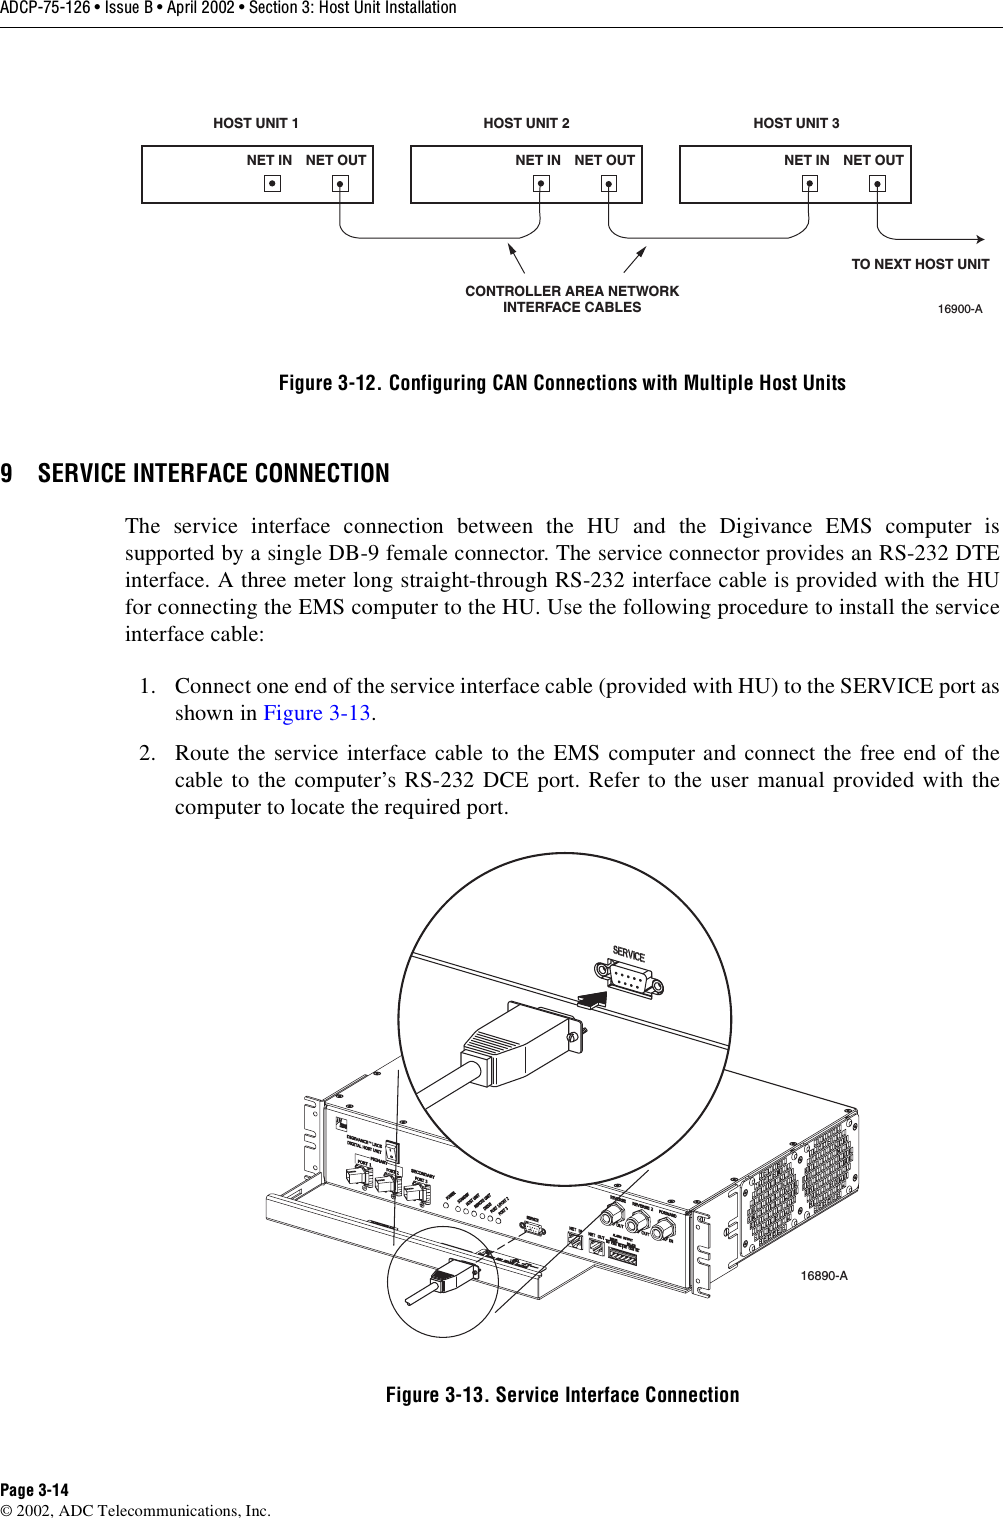 ADCP-75-126 • Issue B • April 2002 • Section 3: Host Unit InstallationPage 3-14©2002, ADC Telecommunications, Inc.Figure 3-12. Configuring CAN Connections with Multiple Host Units9 SERVICE INTERFACE CONNECTIONThe service interface connection between the HU and the Digivance EMS computer issupported by asingle DB-9 female connector. The service connector provides an RS-232 DTEinterface. Athree meter long straight-through RS-232 interface cable is provided with the HUfor connecting the EMS computer to the HU. Use the following procedure to install the serviceinterface cable:1. Connect one end of the service interface cable (provided with HU) to the SERVICE port asshown in Figure 3-13.2. Route the service interface cable to the EMS computer and connect the free end of thecable to the computer’s RS-232 DCE port. Refer to the user manual provided with thecomputer to locate the required port.Figure 3-13. Service Interface ConnectionHOST UNIT 1 HOST UNIT 2 HOST UNIT 3NET IN NET OUT NET IN NET OUT NET IN NET OUT16900-ACONTROLLER AREA NETWORKINTERFACE CABLESTO NEXT HOST UNIT16890-A